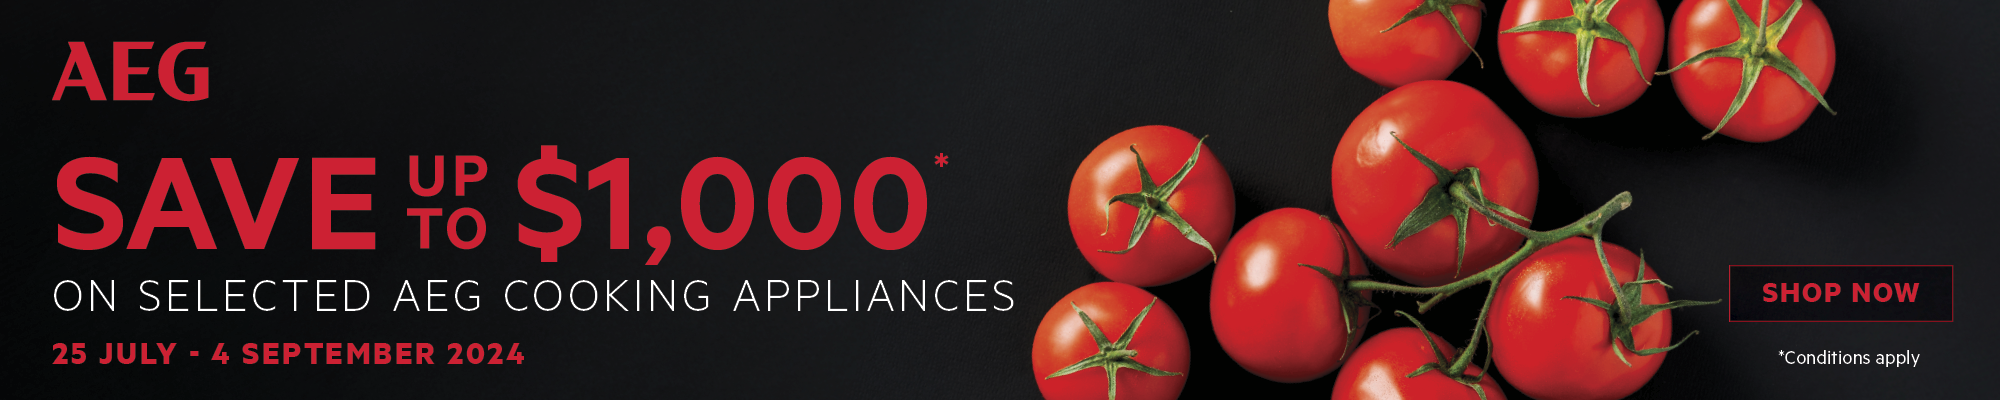 Save Up To $1,000 On Selected AEG Cooking Appliances*